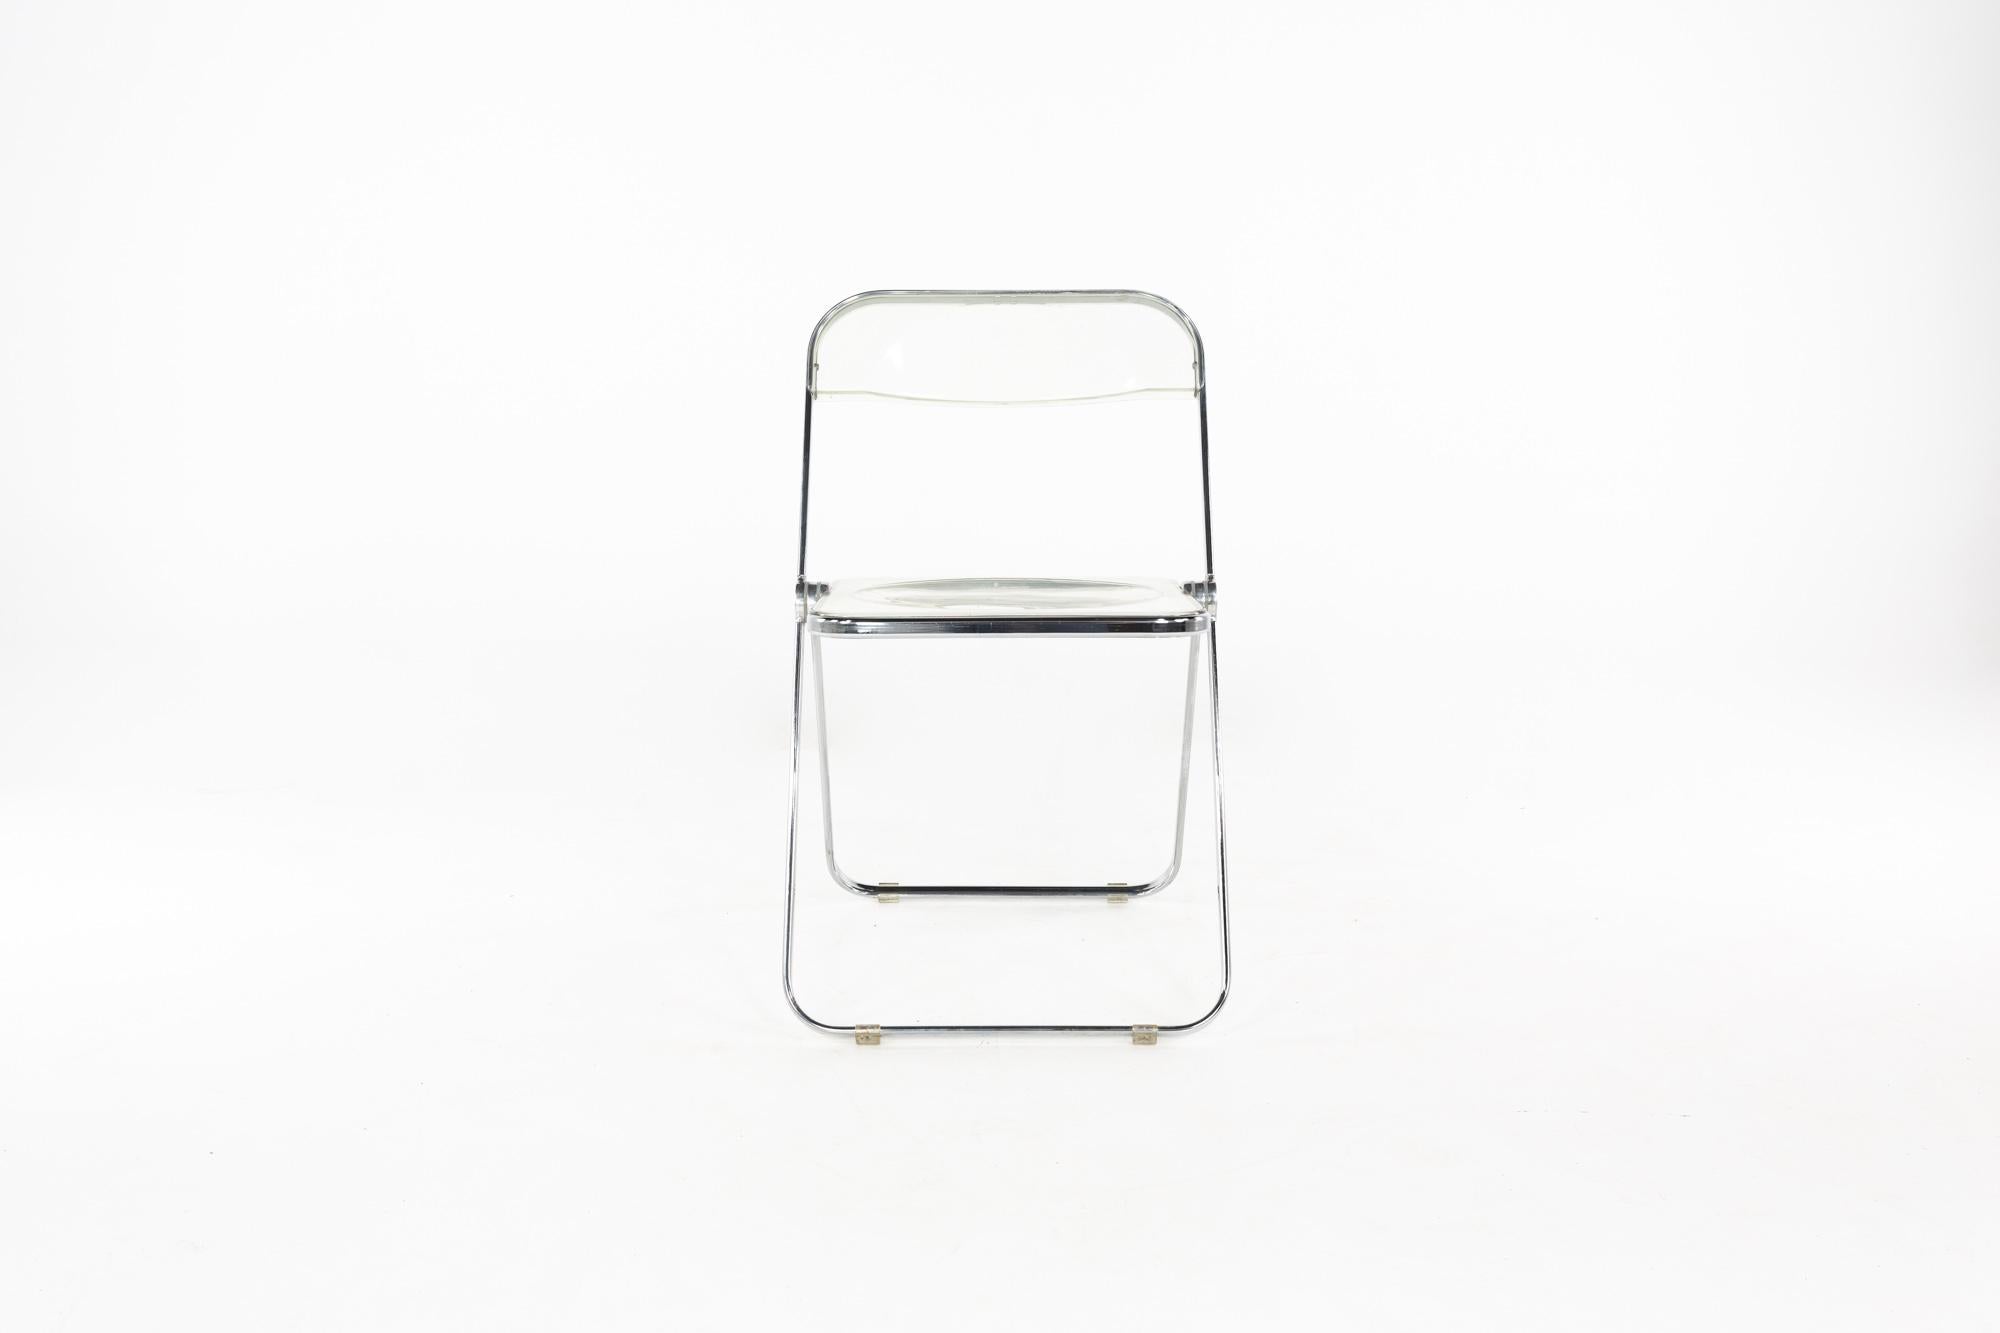 Anonima Castelli mid century Italian Lucite folding chair

Measures: This chair is 18.5 wide x 18.5 deep x 29.5 high, with a seat height of 18 inches

All pieces of furniture can be had in what we call restored vintage condition. That means the